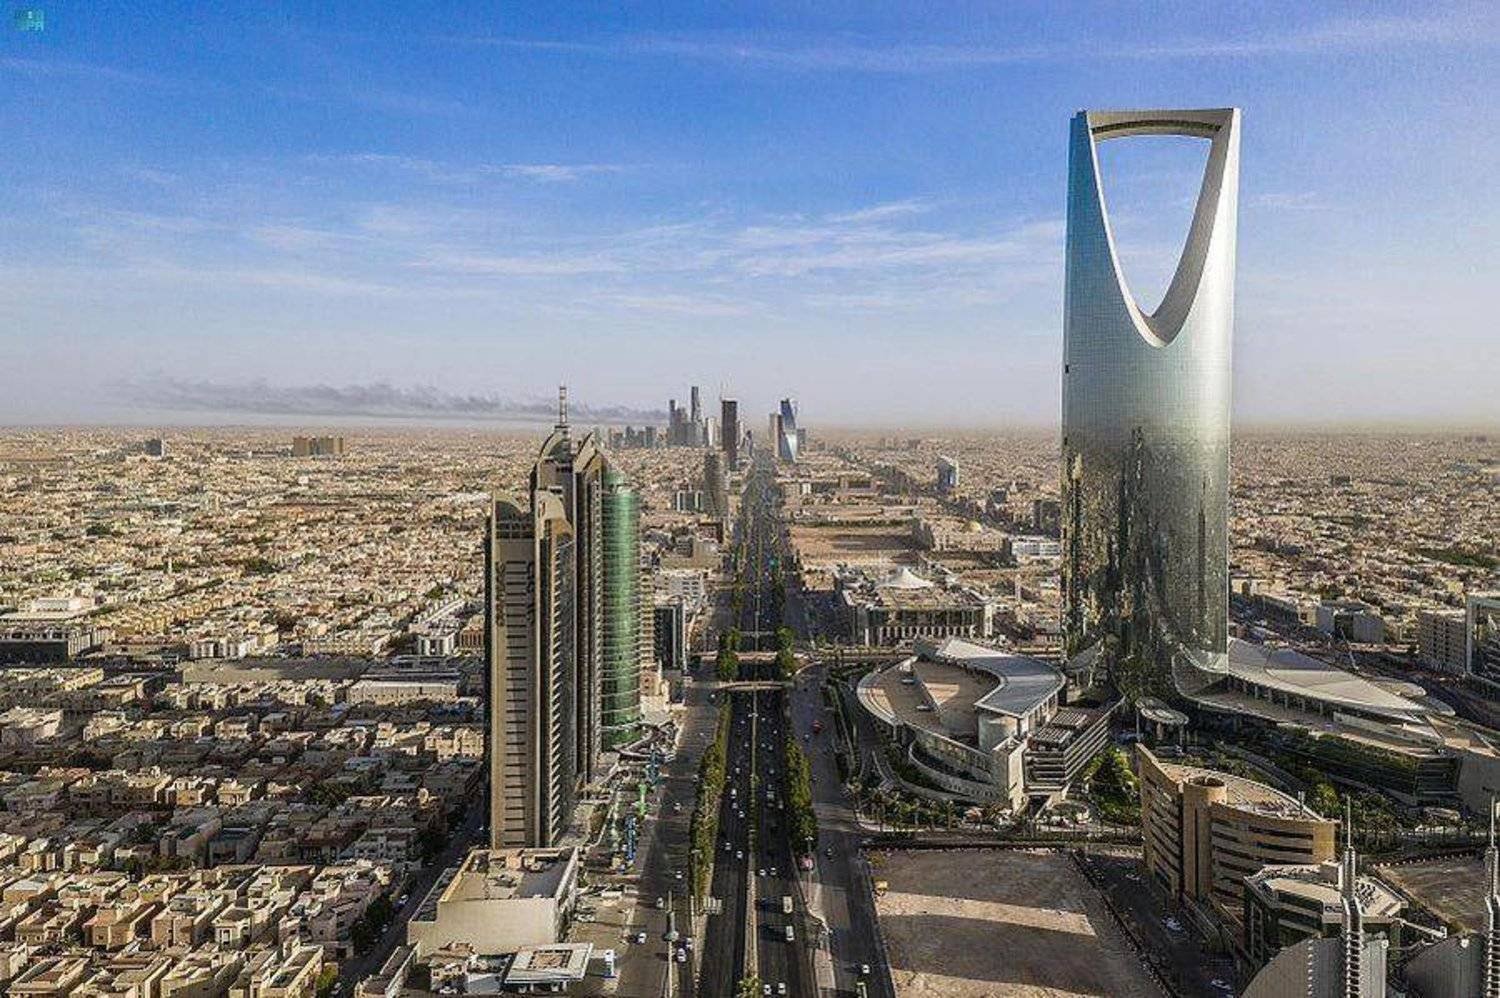 The European Chamber of Commerce in Saudi Arabia, led by Lorcan Tyrrell, will officially launch in Riyadh on Wednesday. SPA